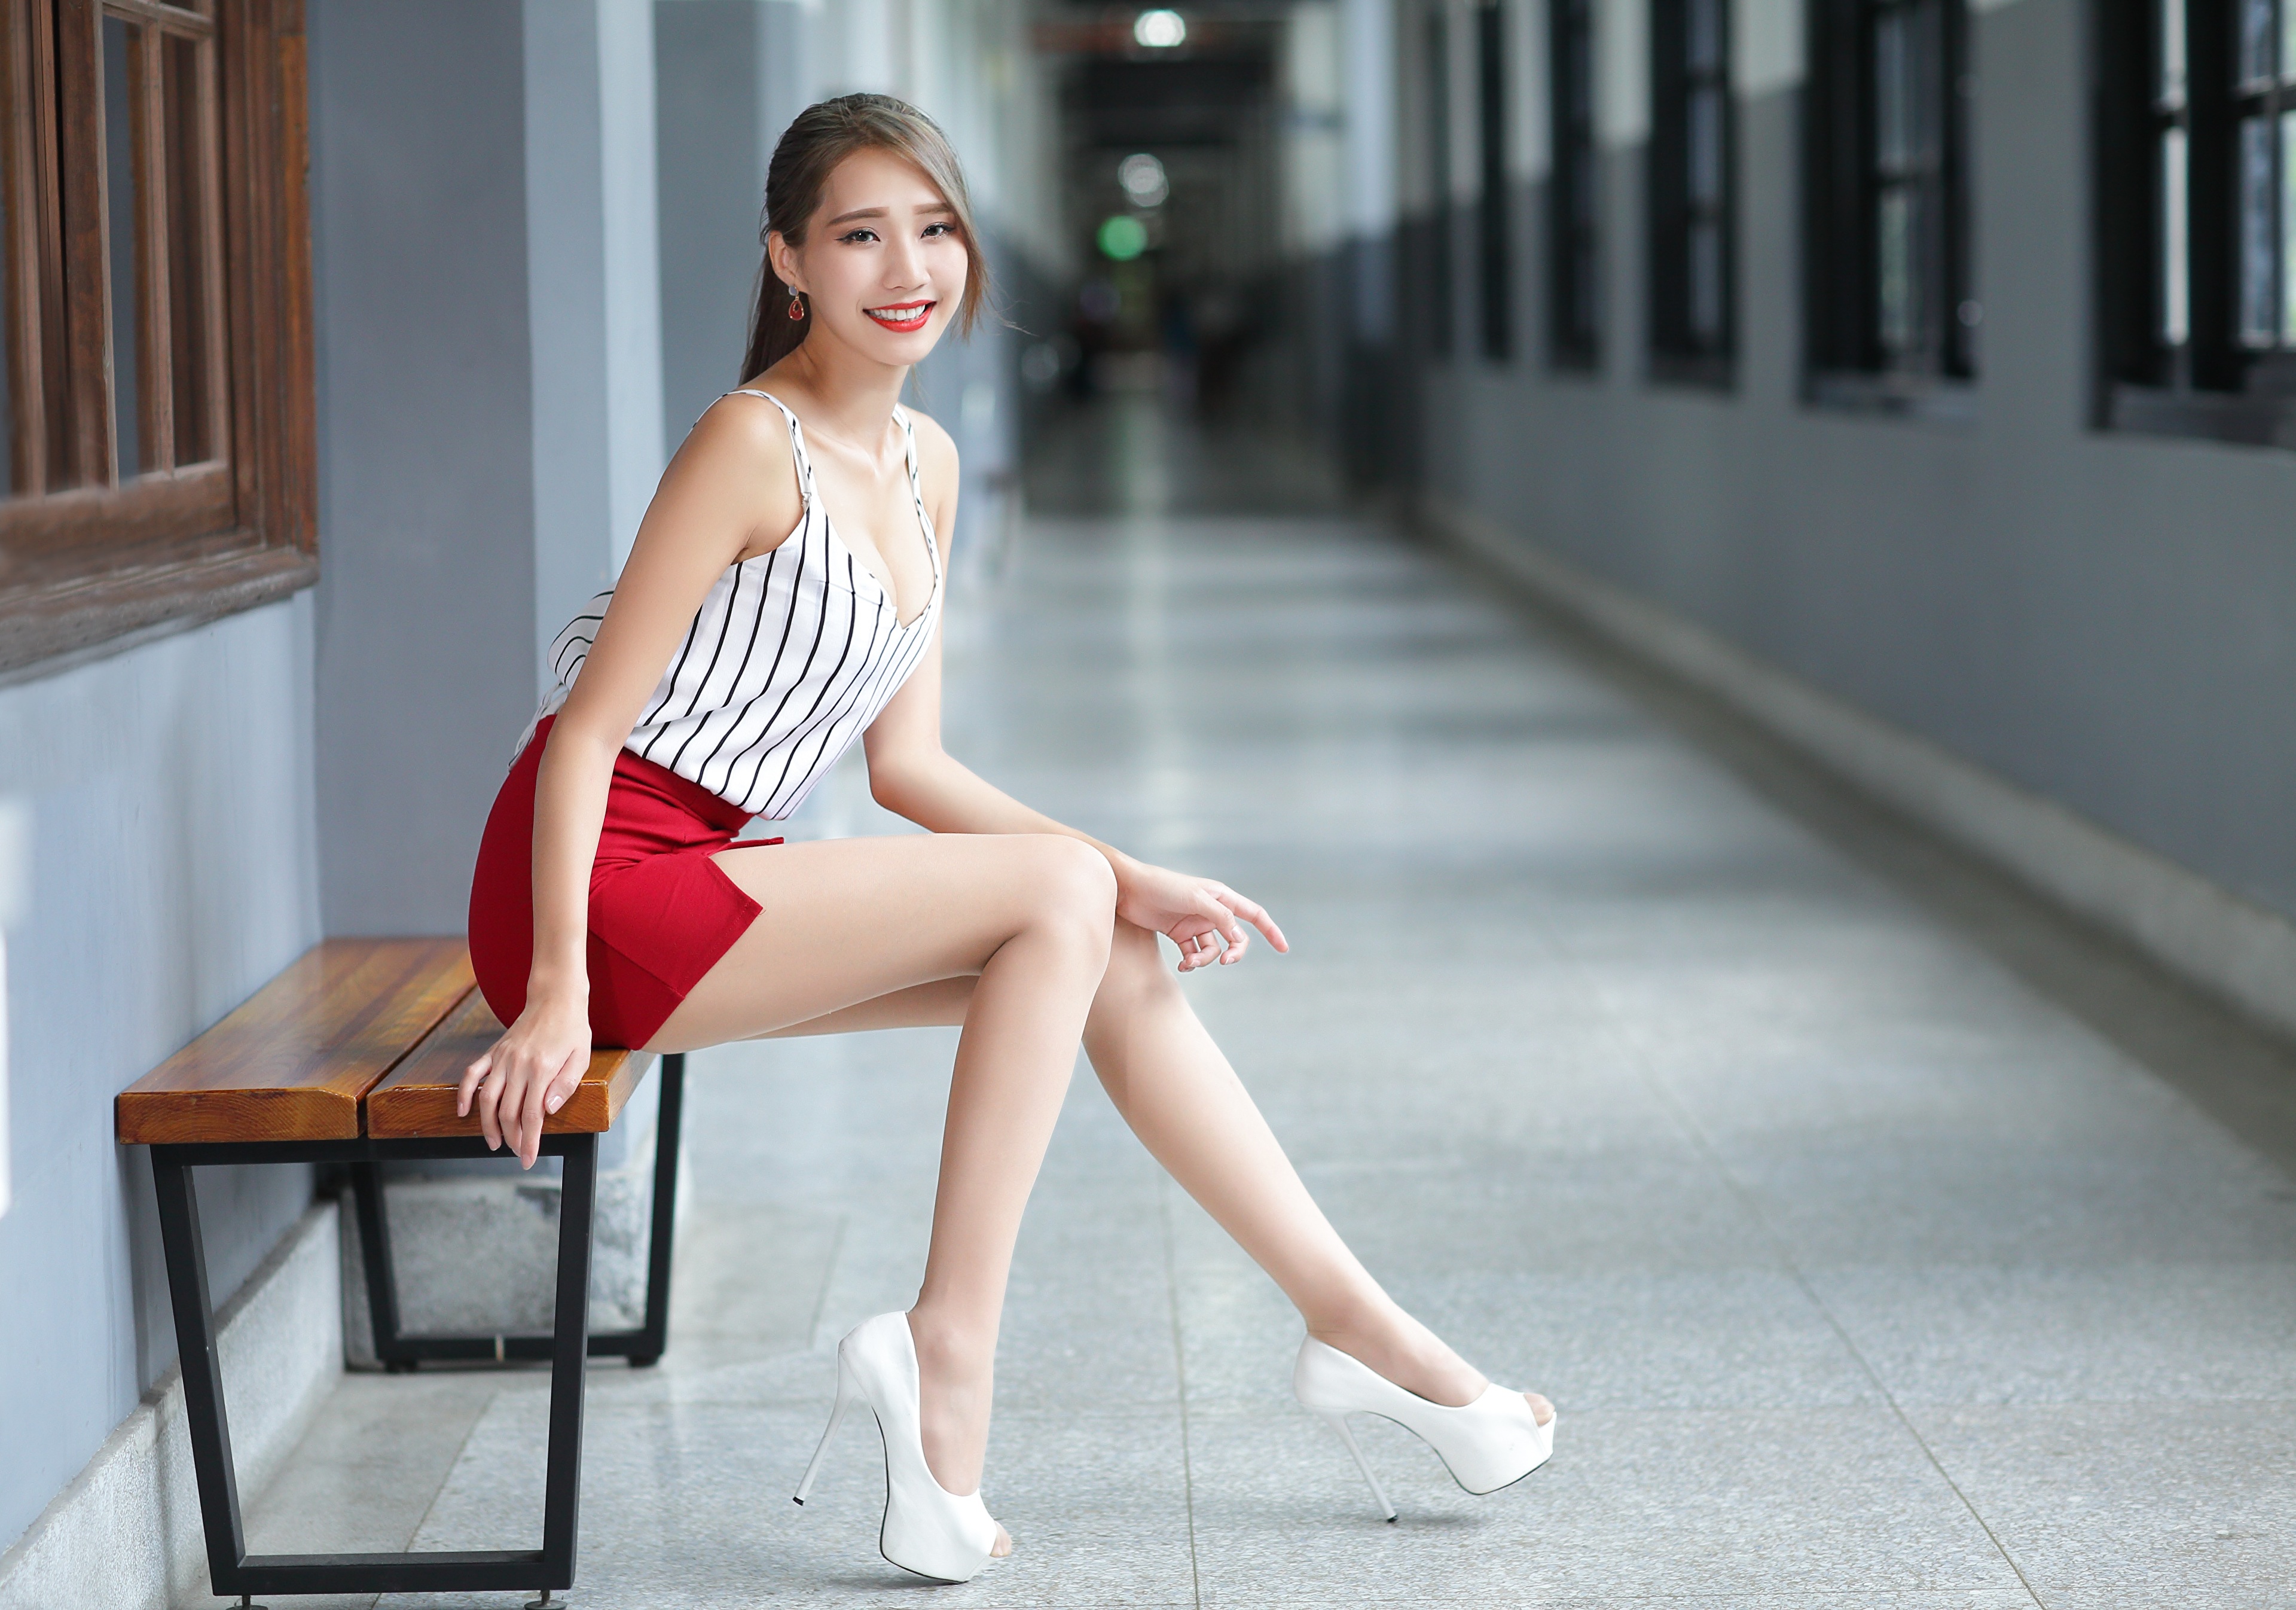 People 3840x2692 Asian model women long hair dark hair sitting bench red skirt white high heels striped shirt ponytail earring hallway window depth of field high heels heels office girl white heels miniskirt red miniskirt arched back cleavage legs pantyhose red lipstick looking at viewer